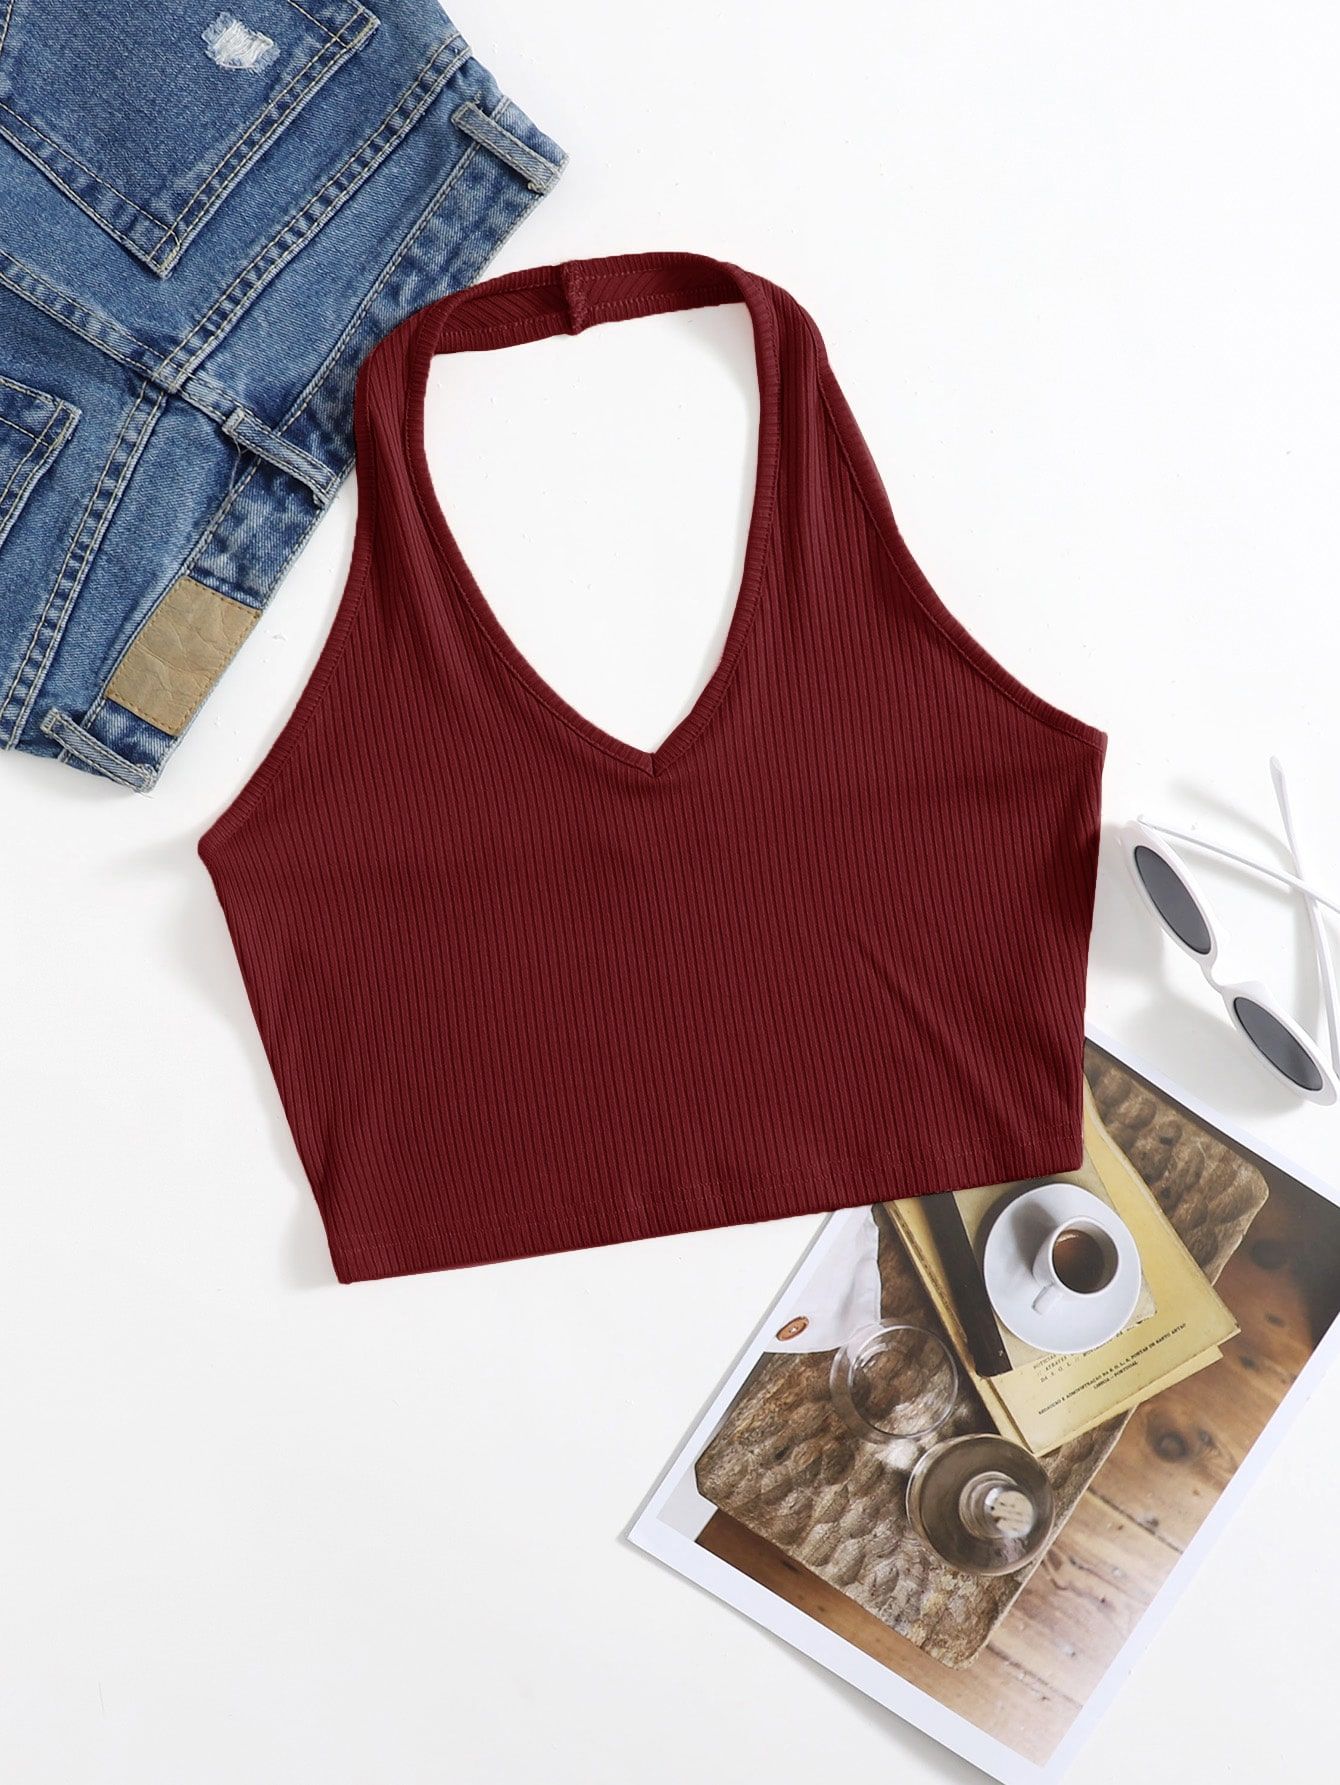 Halter Tops: Chic and Stylish Summer Staples